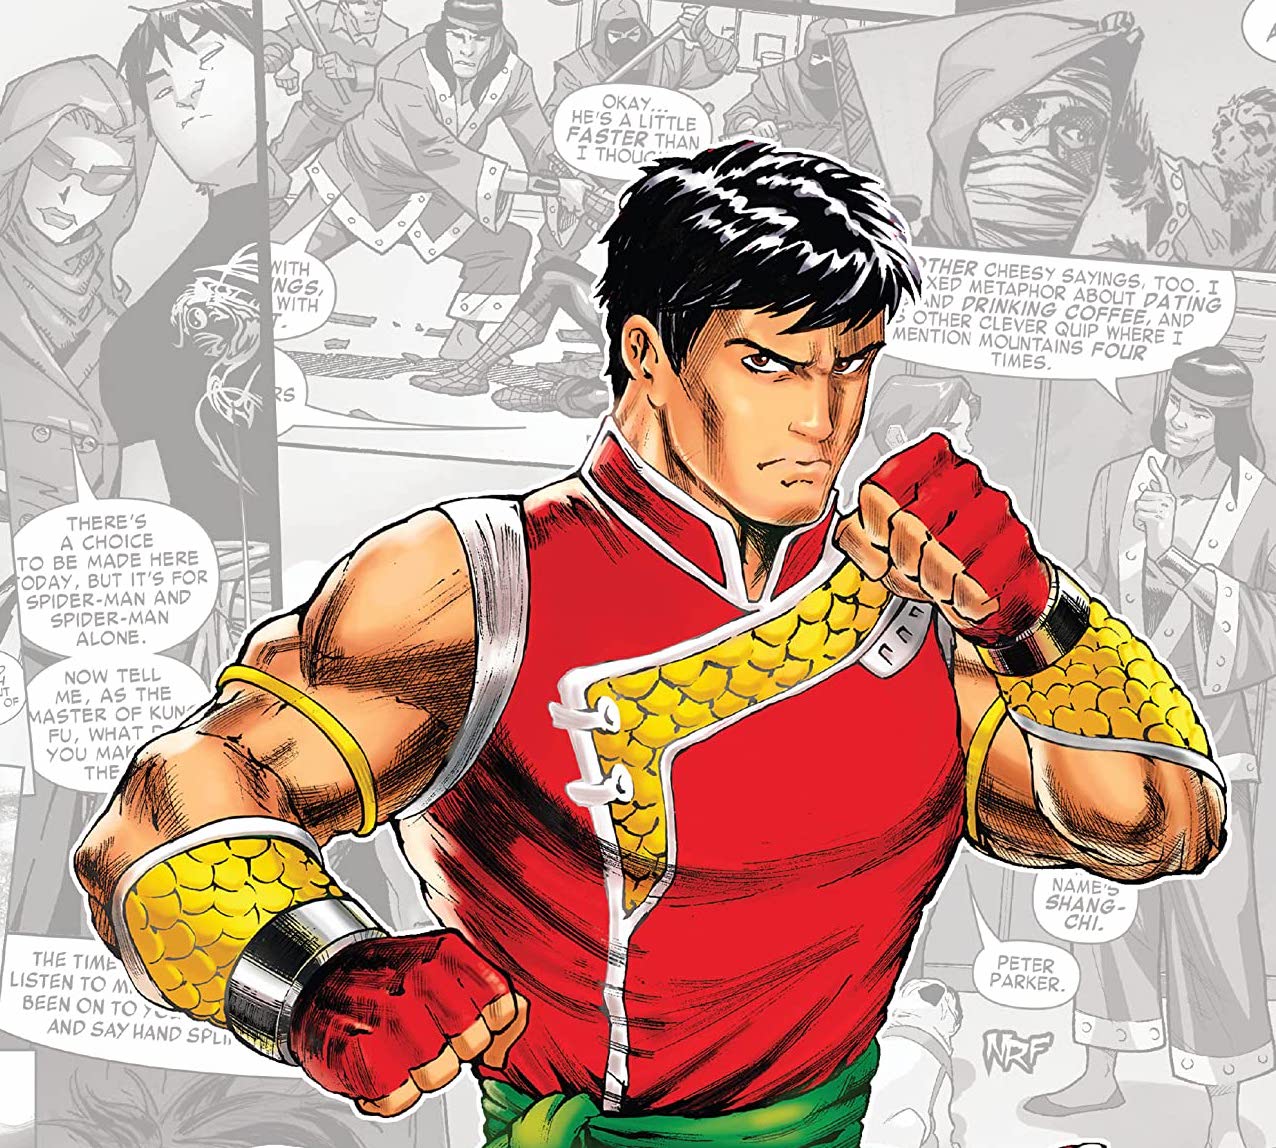 'Marvel-Verse: Shang-Chi' features a wise and patient hero